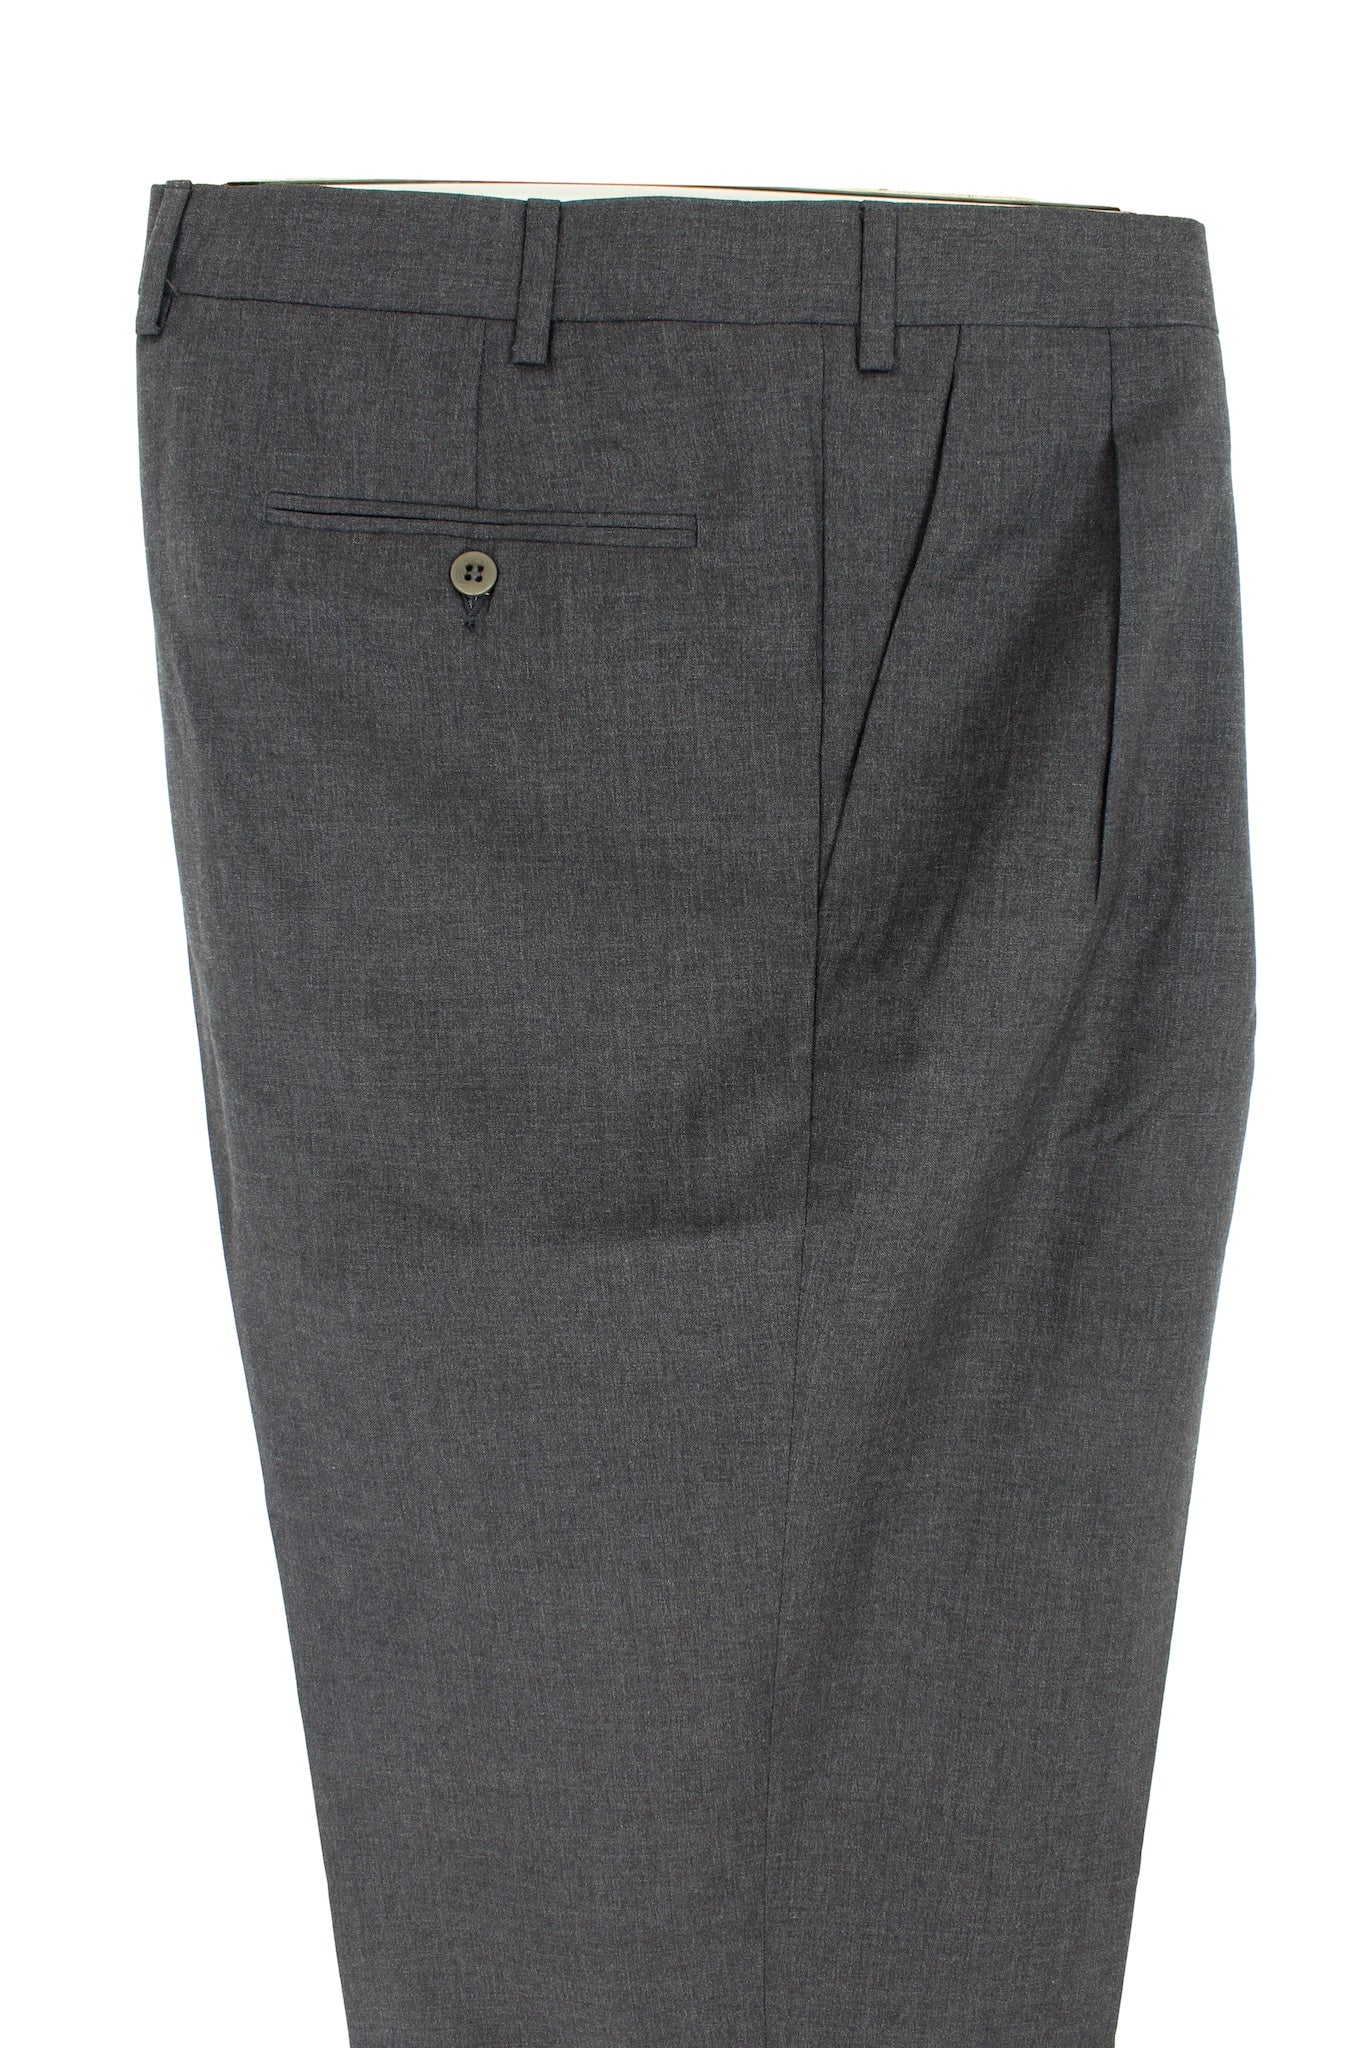 Burberry Brit Skinny Fit Wool Blend Trousers in Gray for Men